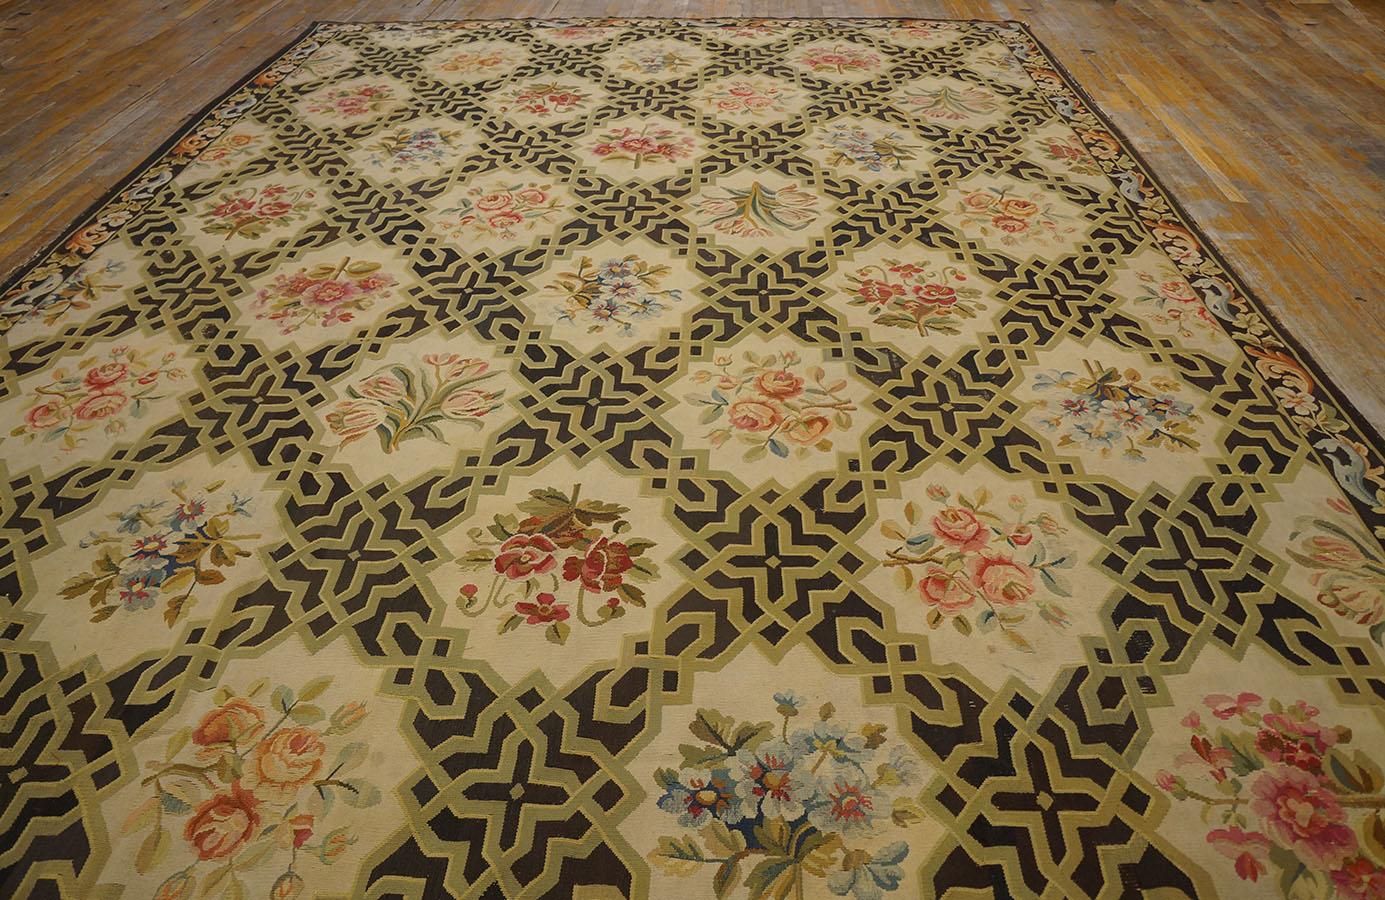 Early 20th Century French Aubusson Carpet ( 9' 8'' x 15' 3'' - 295 x 465 cm ) For Sale 7